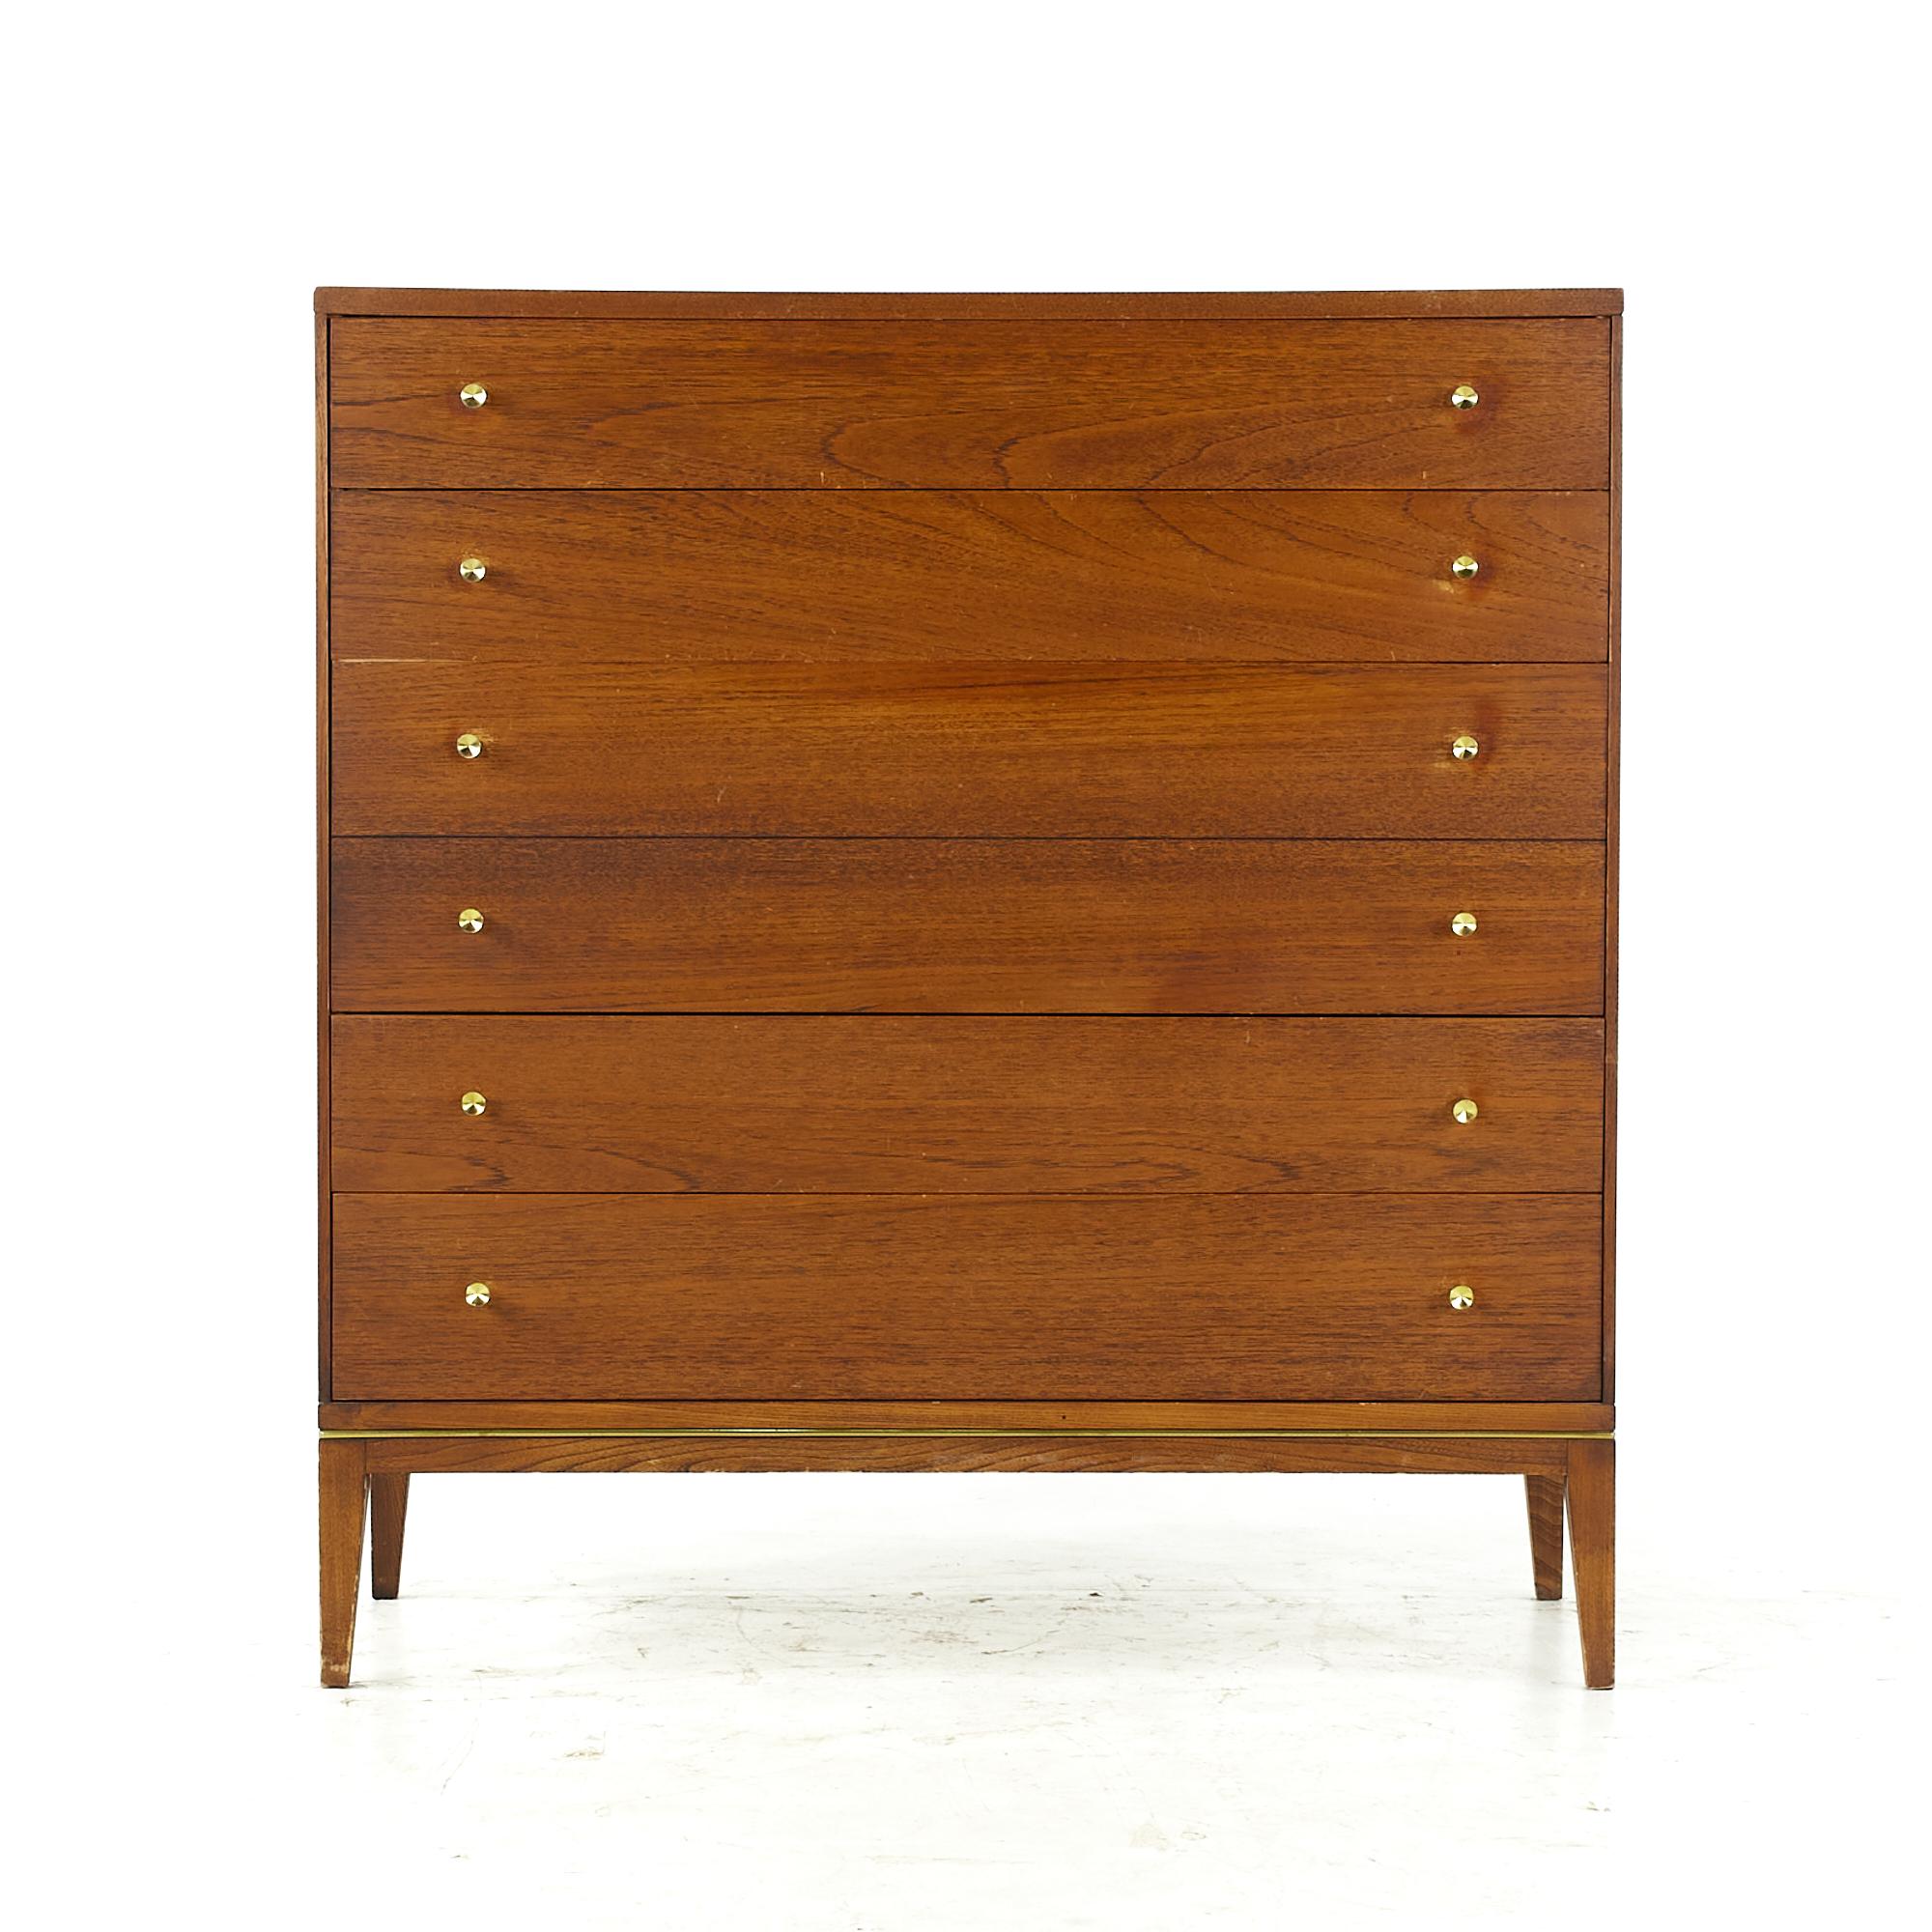 Rway midcentury walnut and brass 5-drawer highboy dresser

This highboy measures: 40 wide x 18.25 deep x 43 inches high

All pieces of furniture can be had in what we call restored vintage condition. That means the piece is restored upon